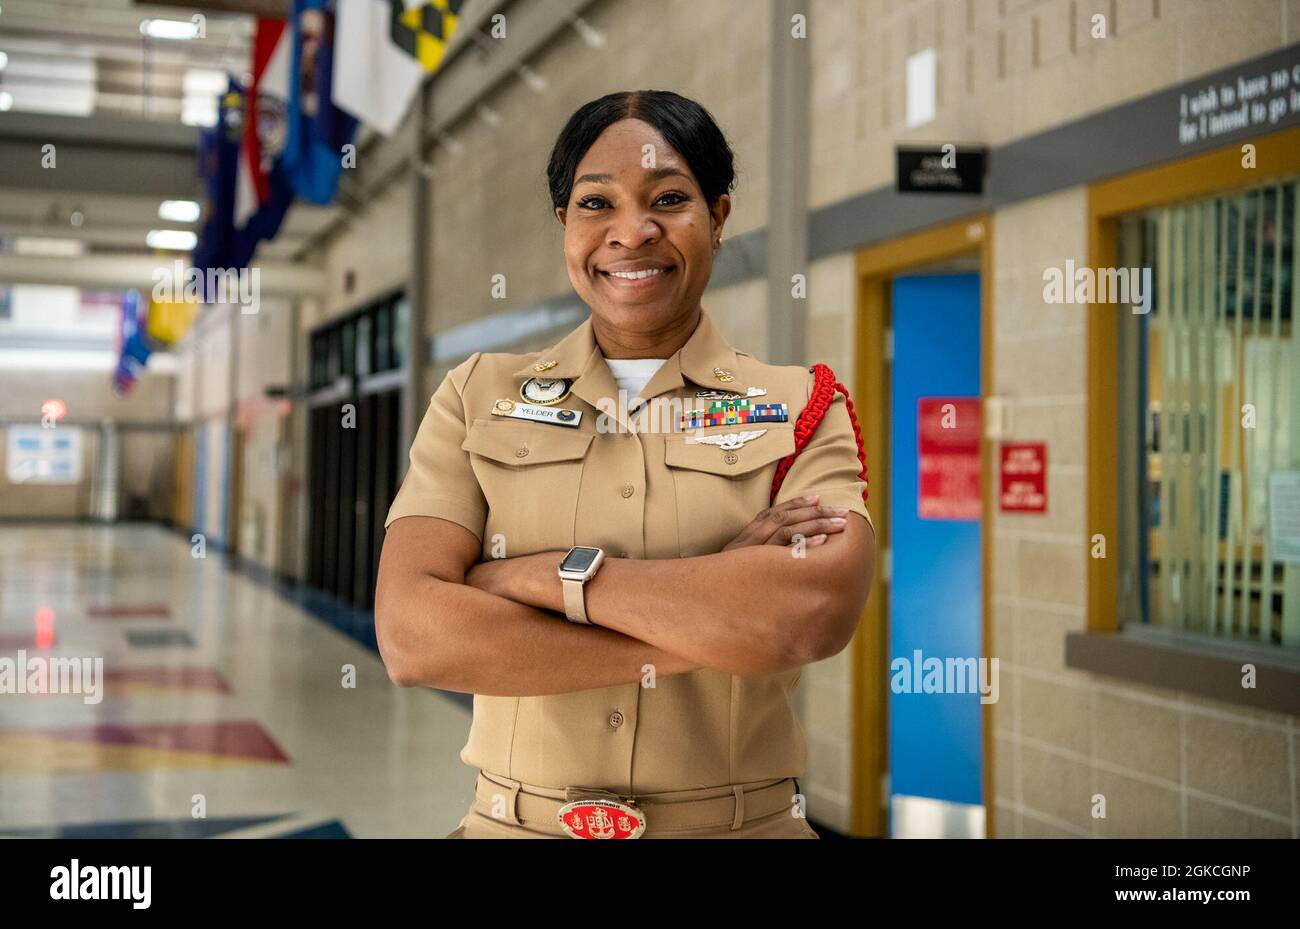 Senior Chief Yeoman Tay Yelder, a recruit division commander and In-Processing leading chief petty officer, poses for a portrait inside the Golden Thirteen In-Processing Building at Recruit Training Command. More than 40,000 recruits train annually at the Navy’s only boot camp. Stock Photo